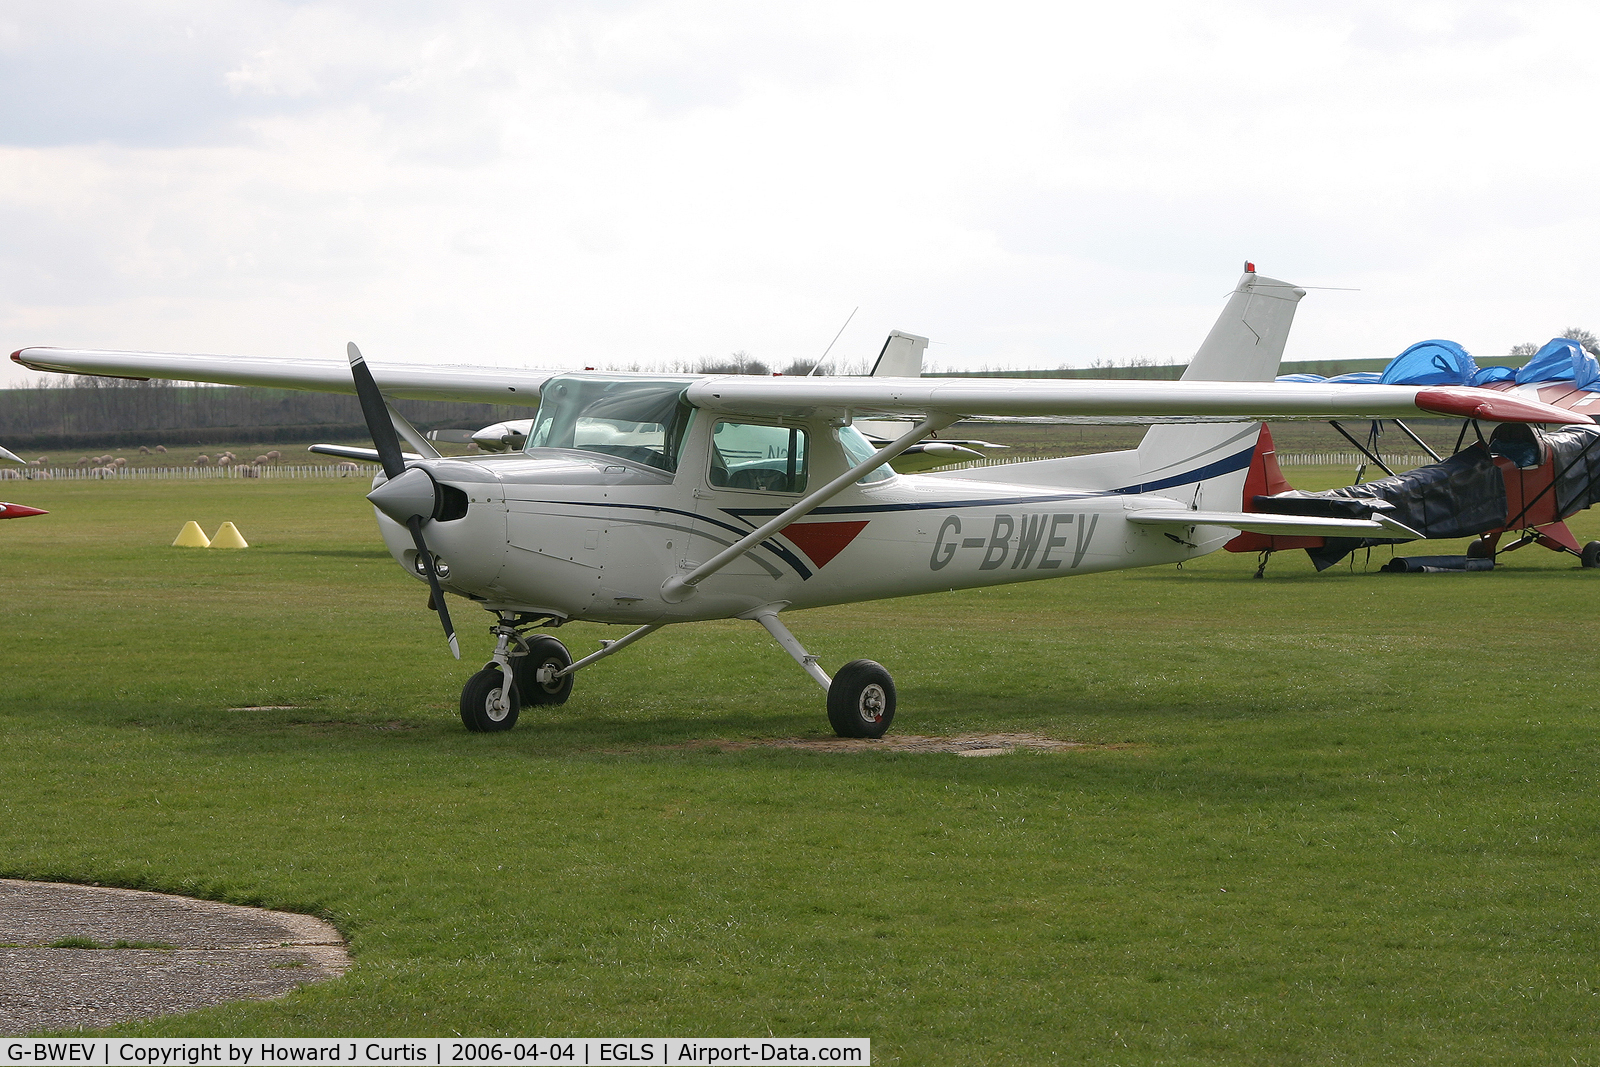 G-BWEV, 1979 Cessna 152 C/N 152-83182, Privately owned.